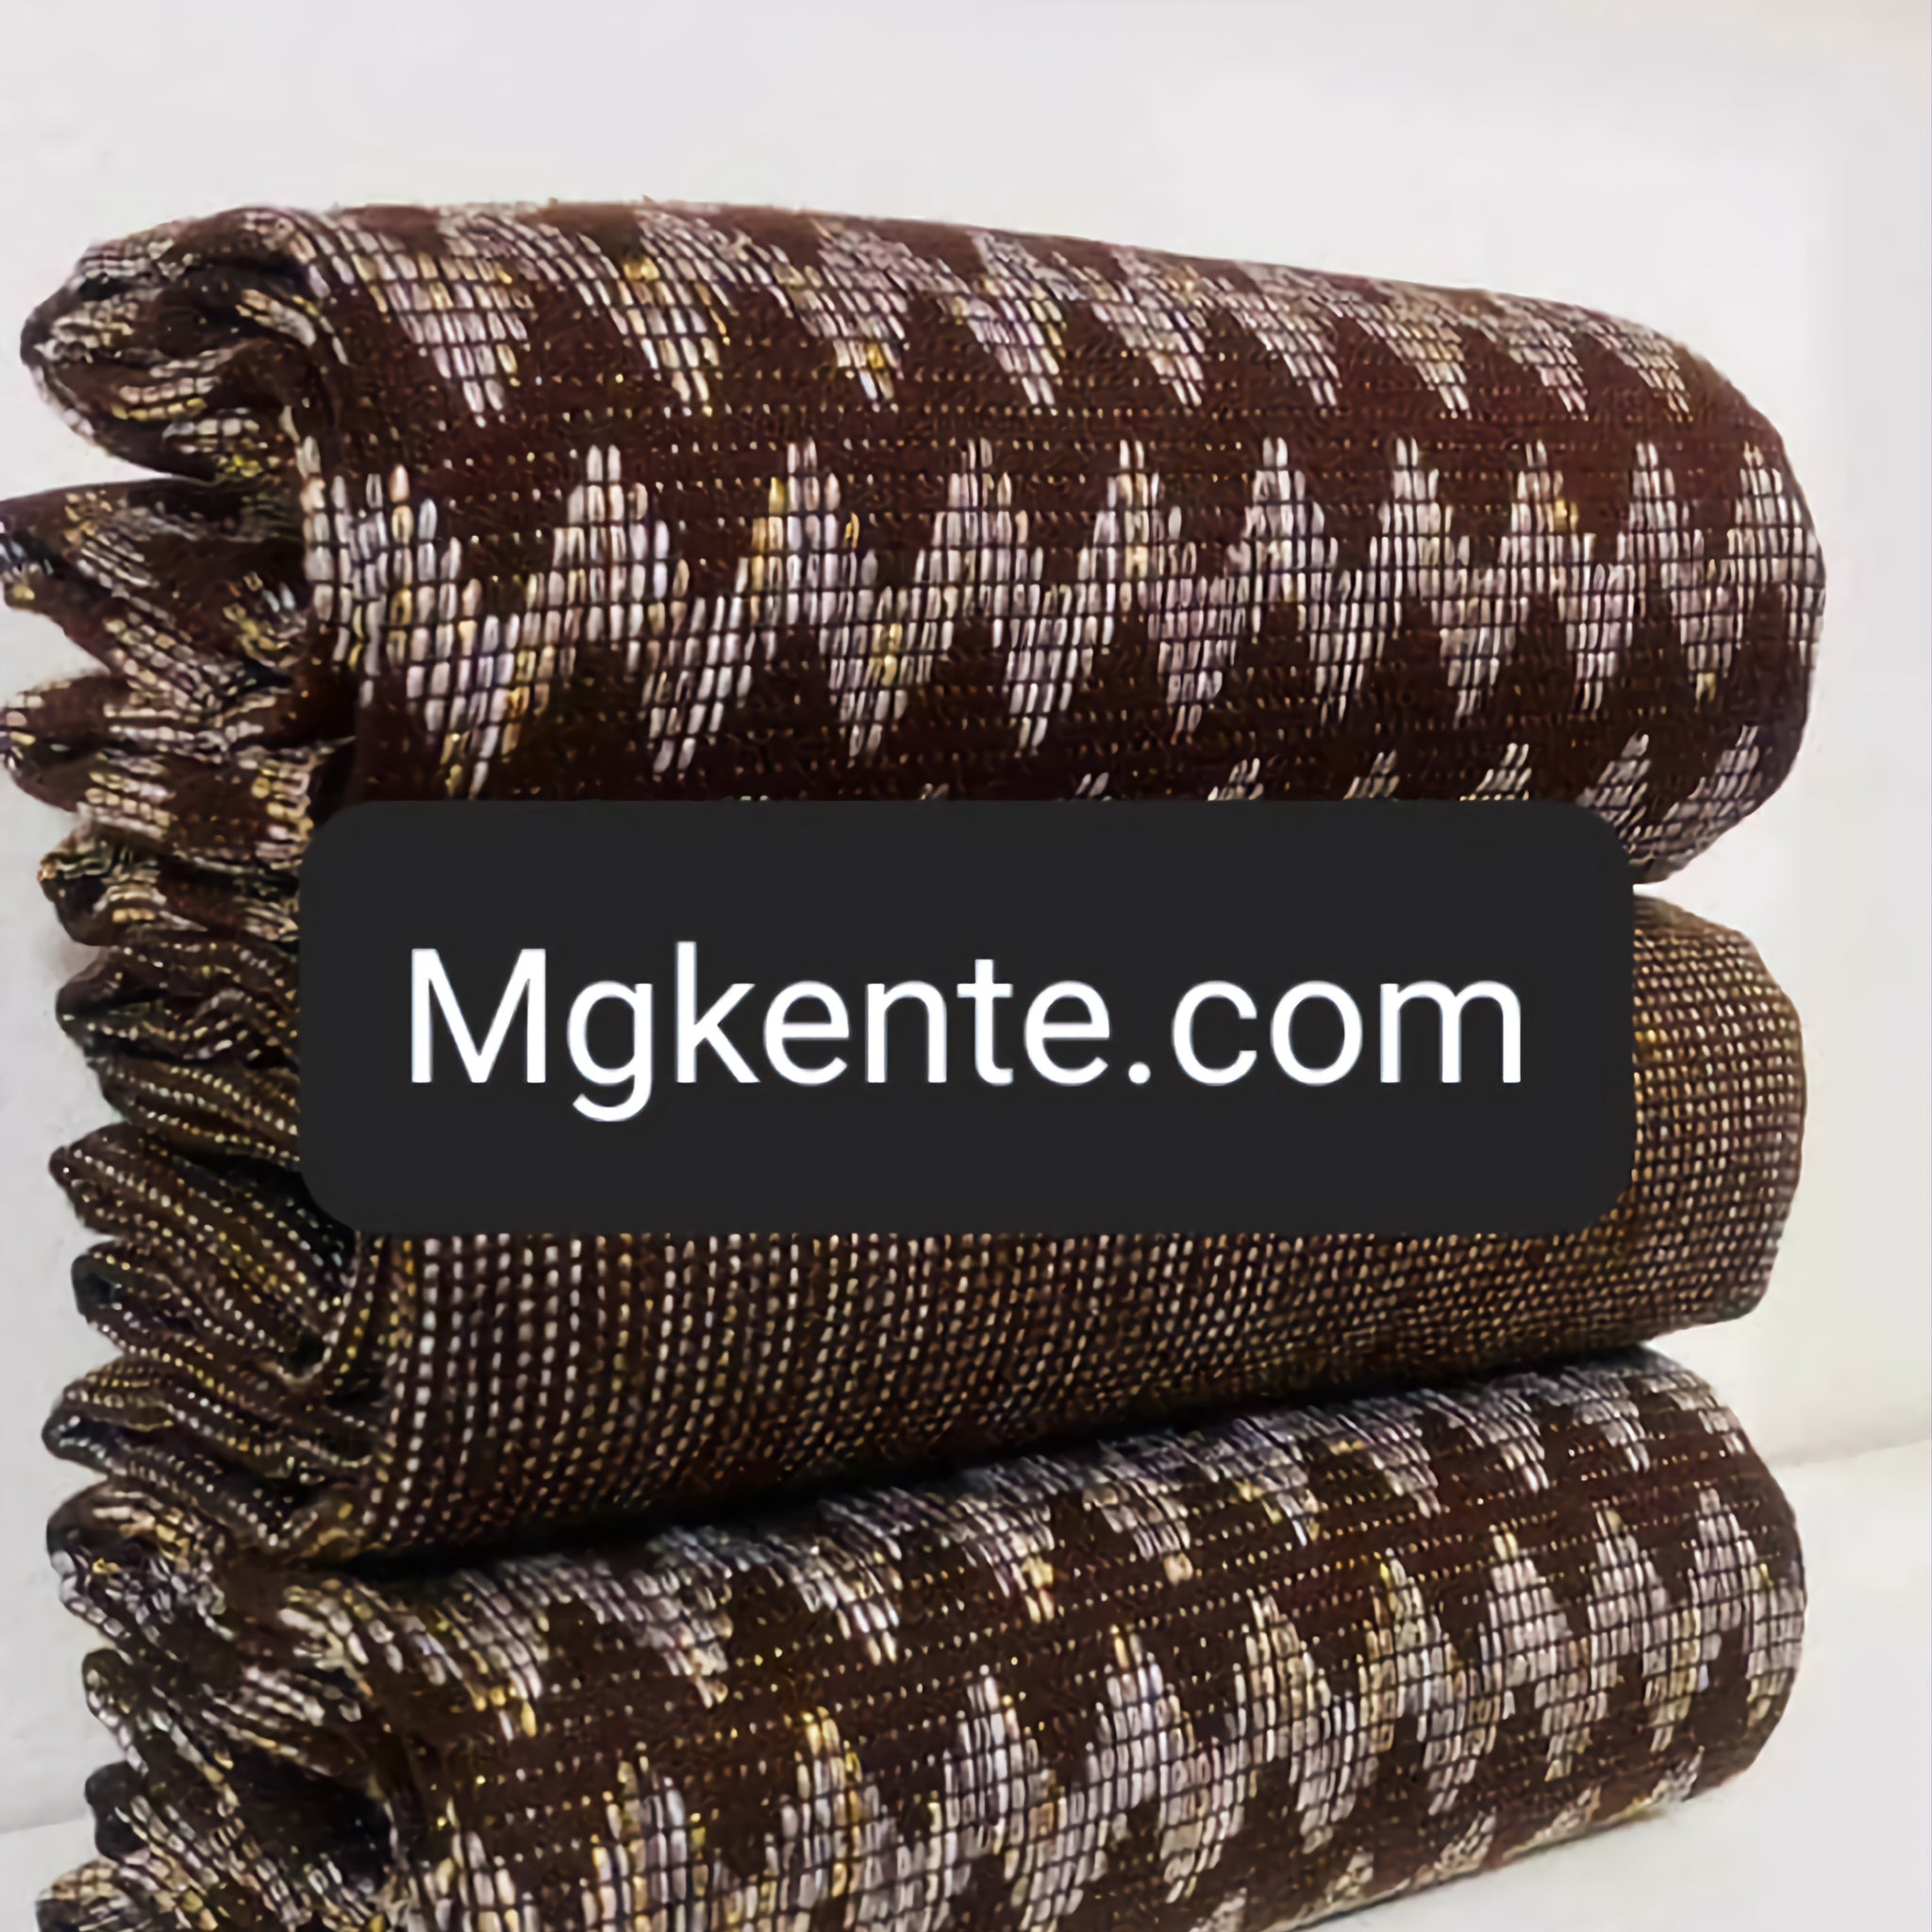 MG Authentic Hand Weaved Kente Cloth A4021